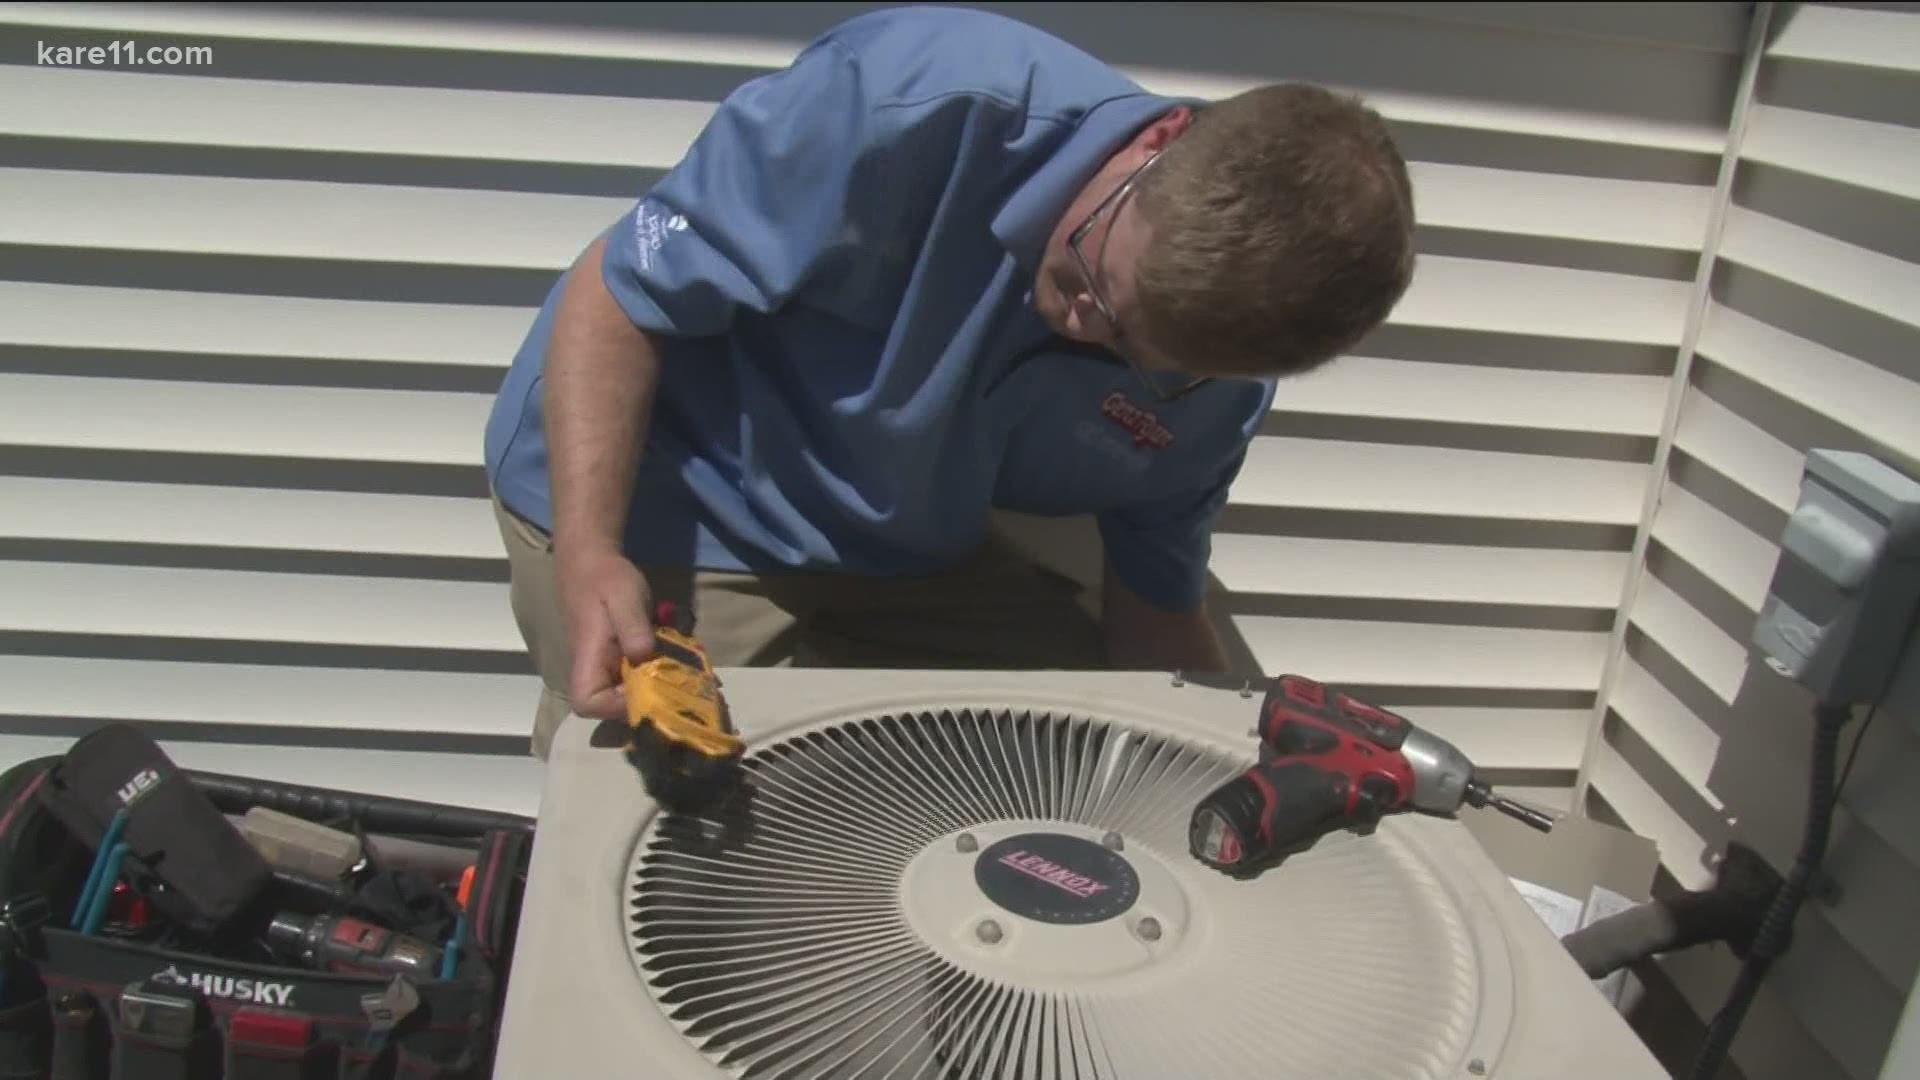 Air conditioning repair crews will be busy during this heat wave. Here's some tips to make sure your system does not break down and to remain cool this weekend